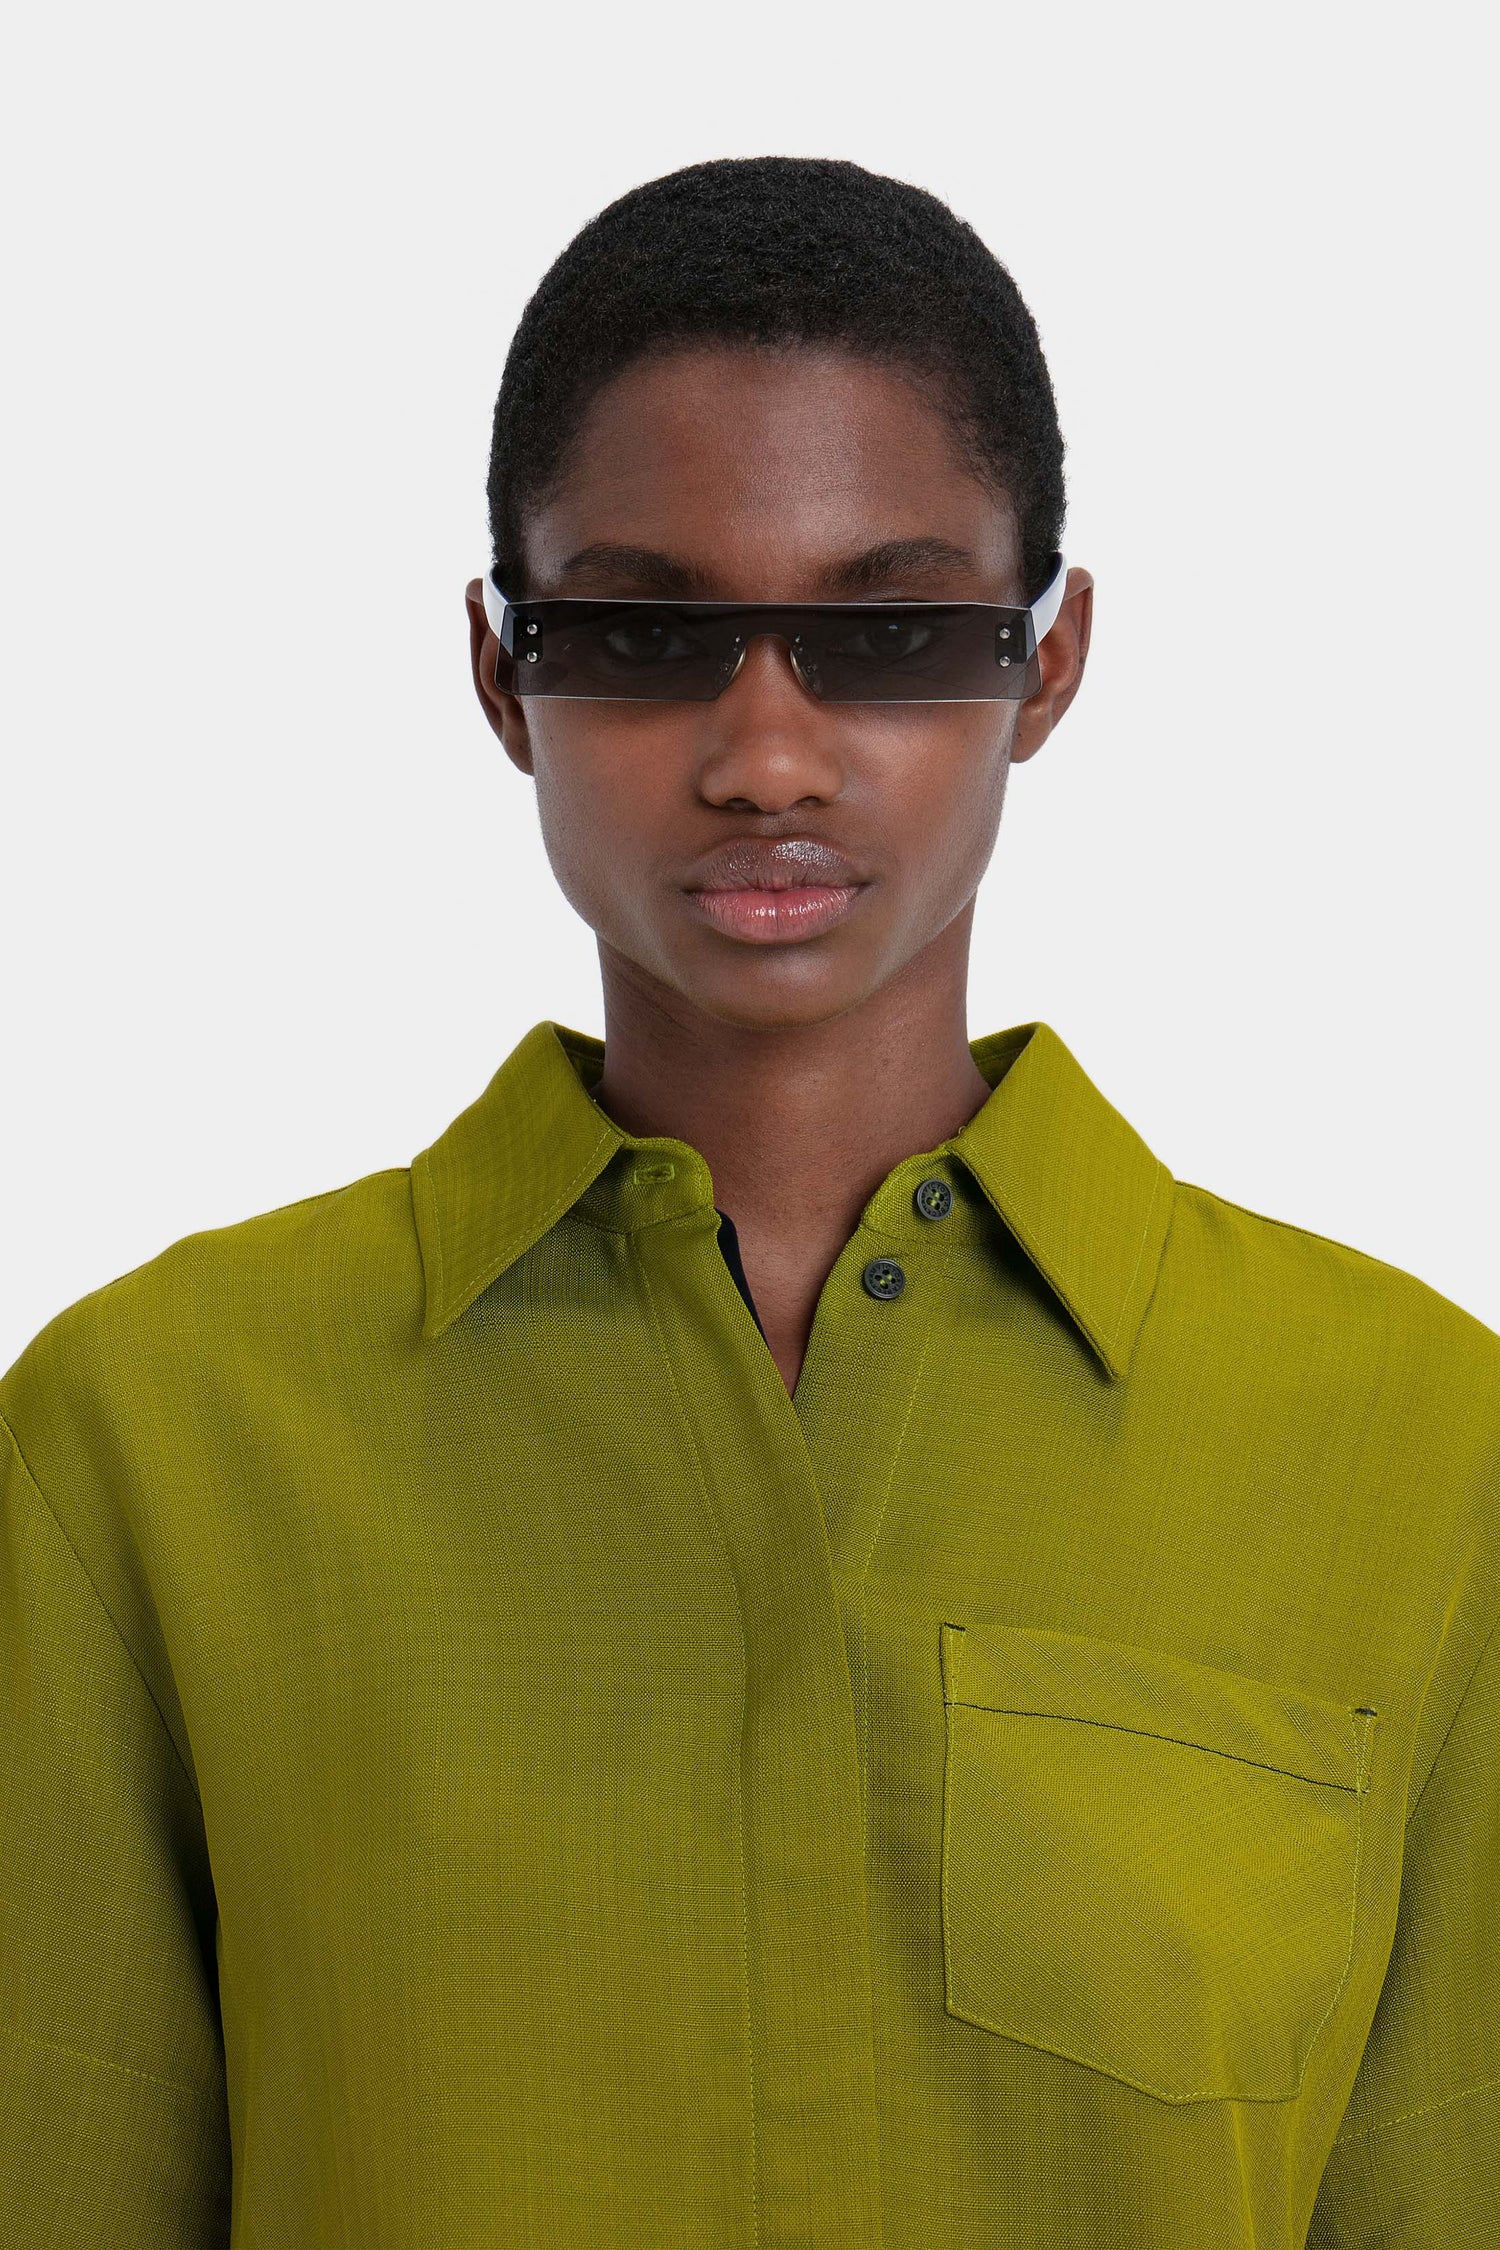 A person wearing Mini Visor Sunglasses In Black-Green and a bright green collared shirt, reminiscent of the SS23 Victoria Beckham collection, stands against a plain background.